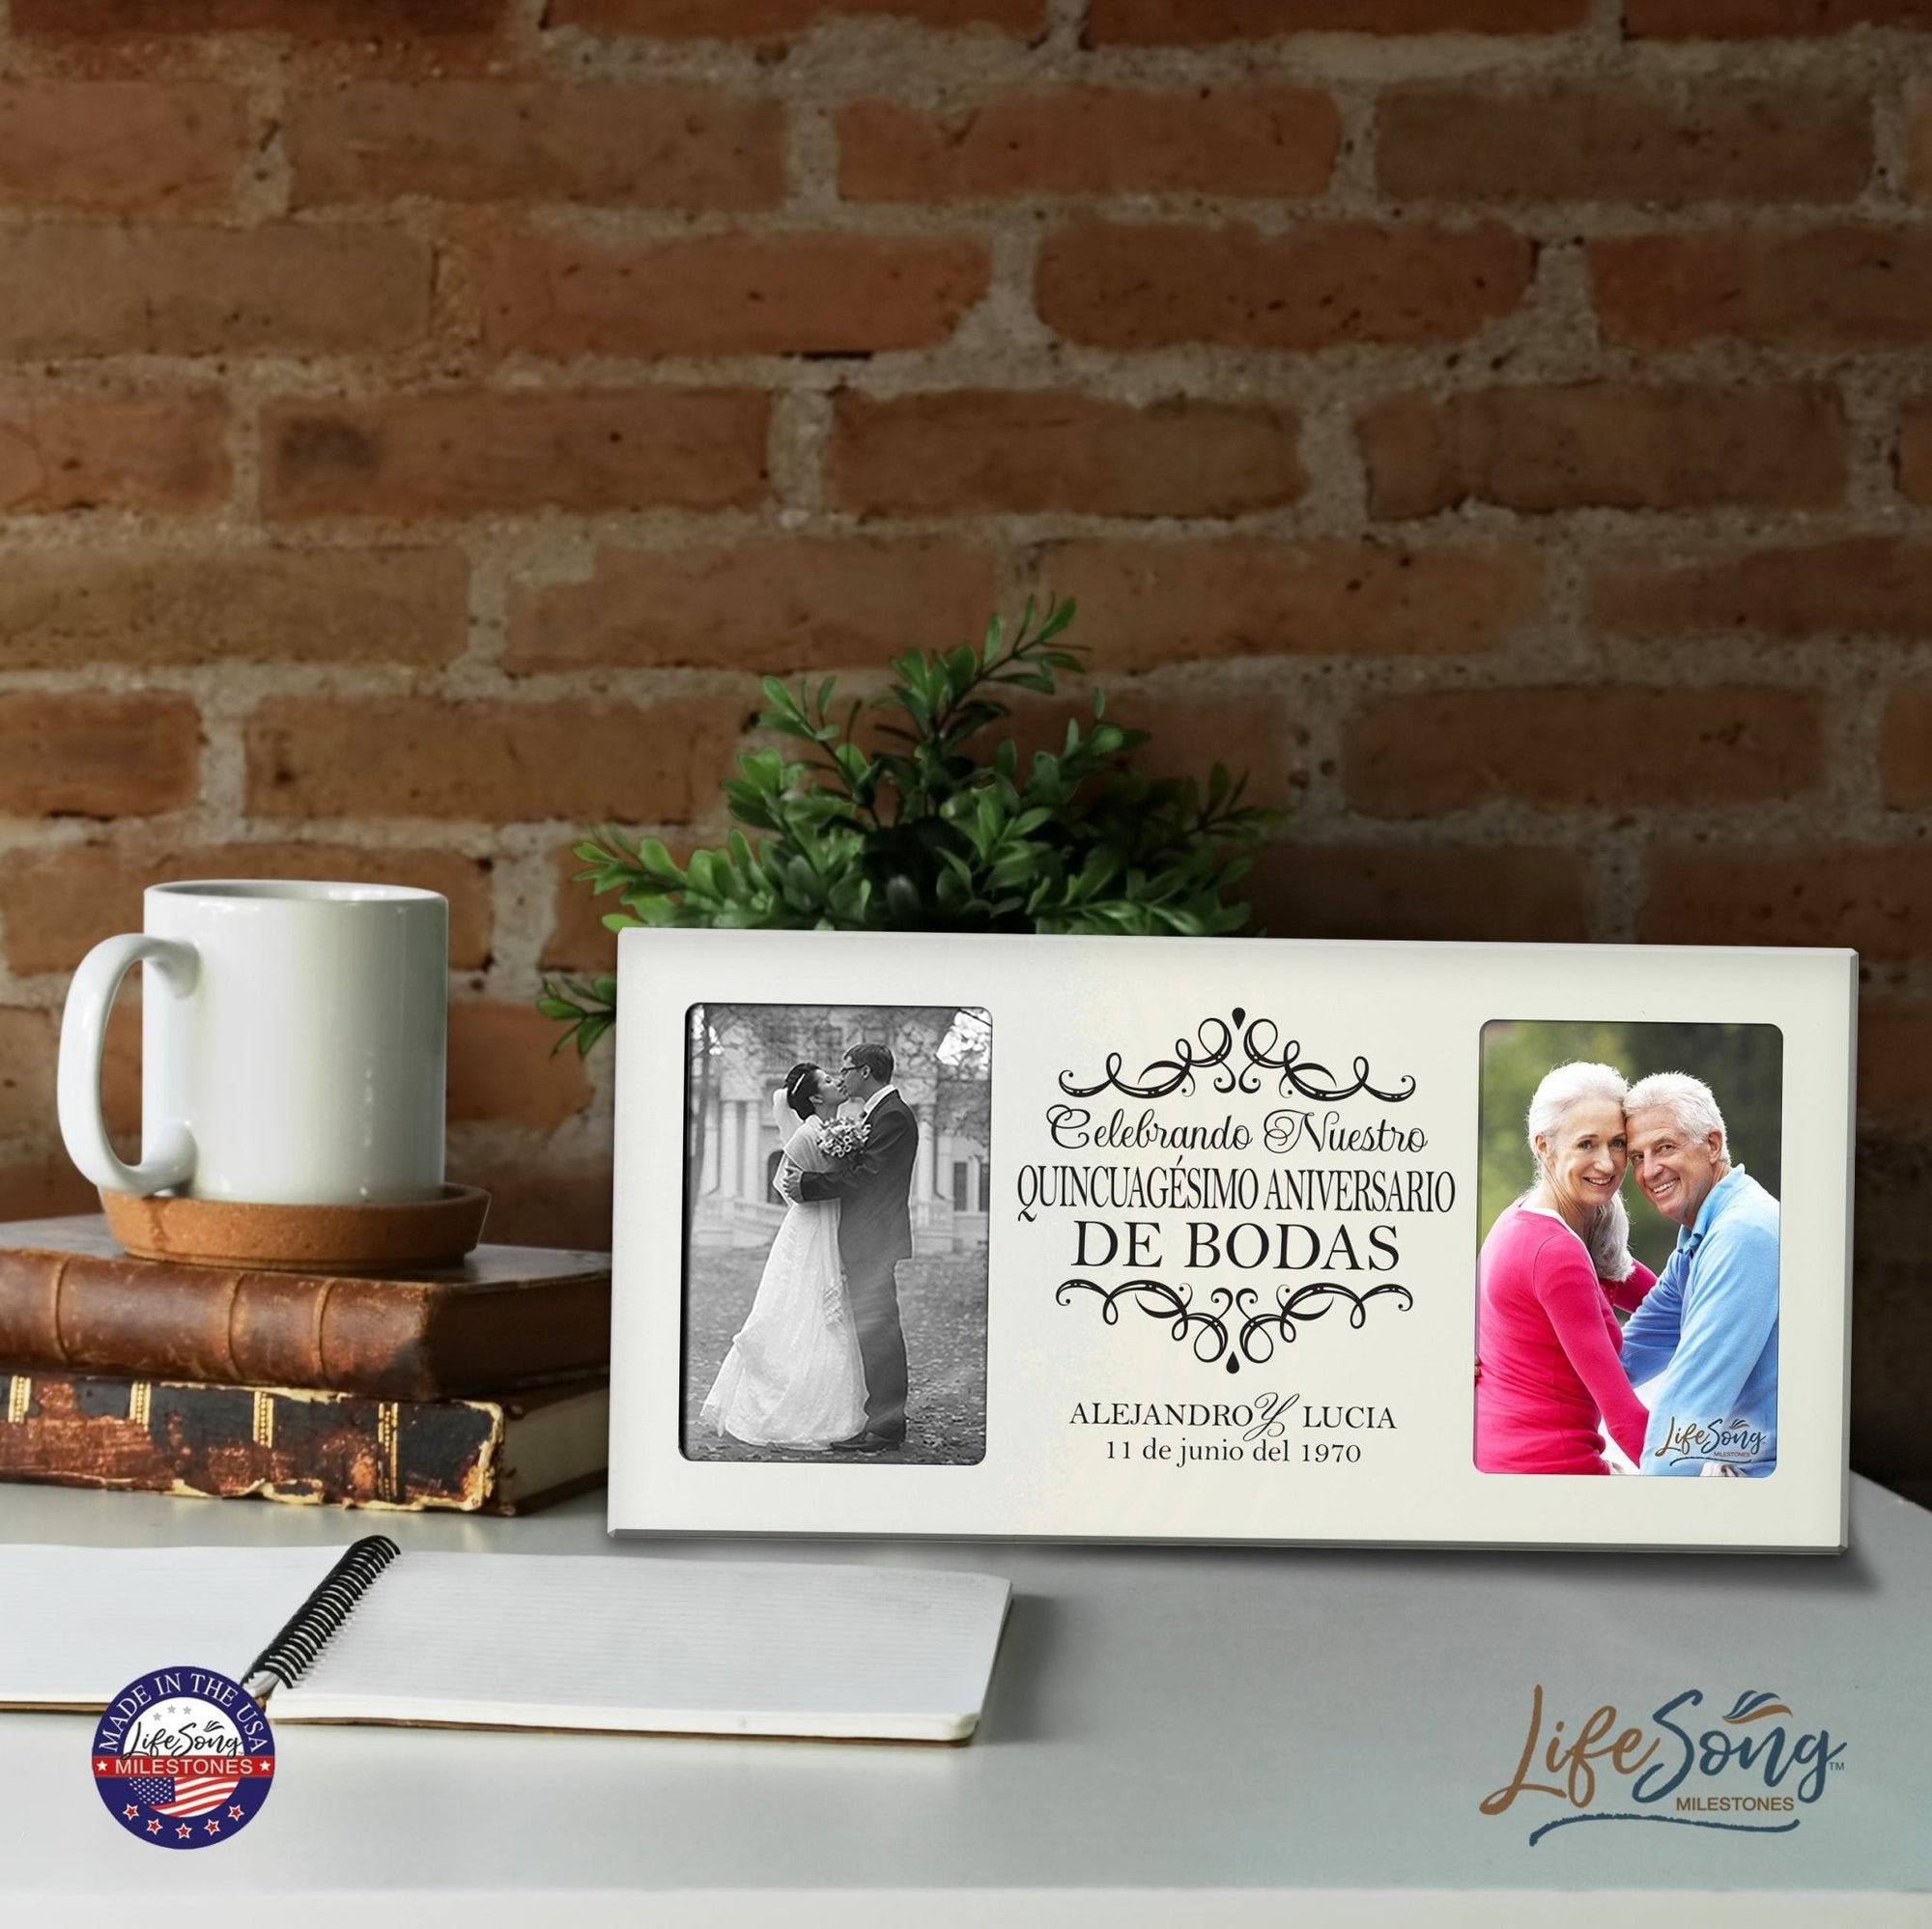 Unique Spanish Picture Frame 50th Wedding Anniversary Home Decor – Personalized Gift for Couples